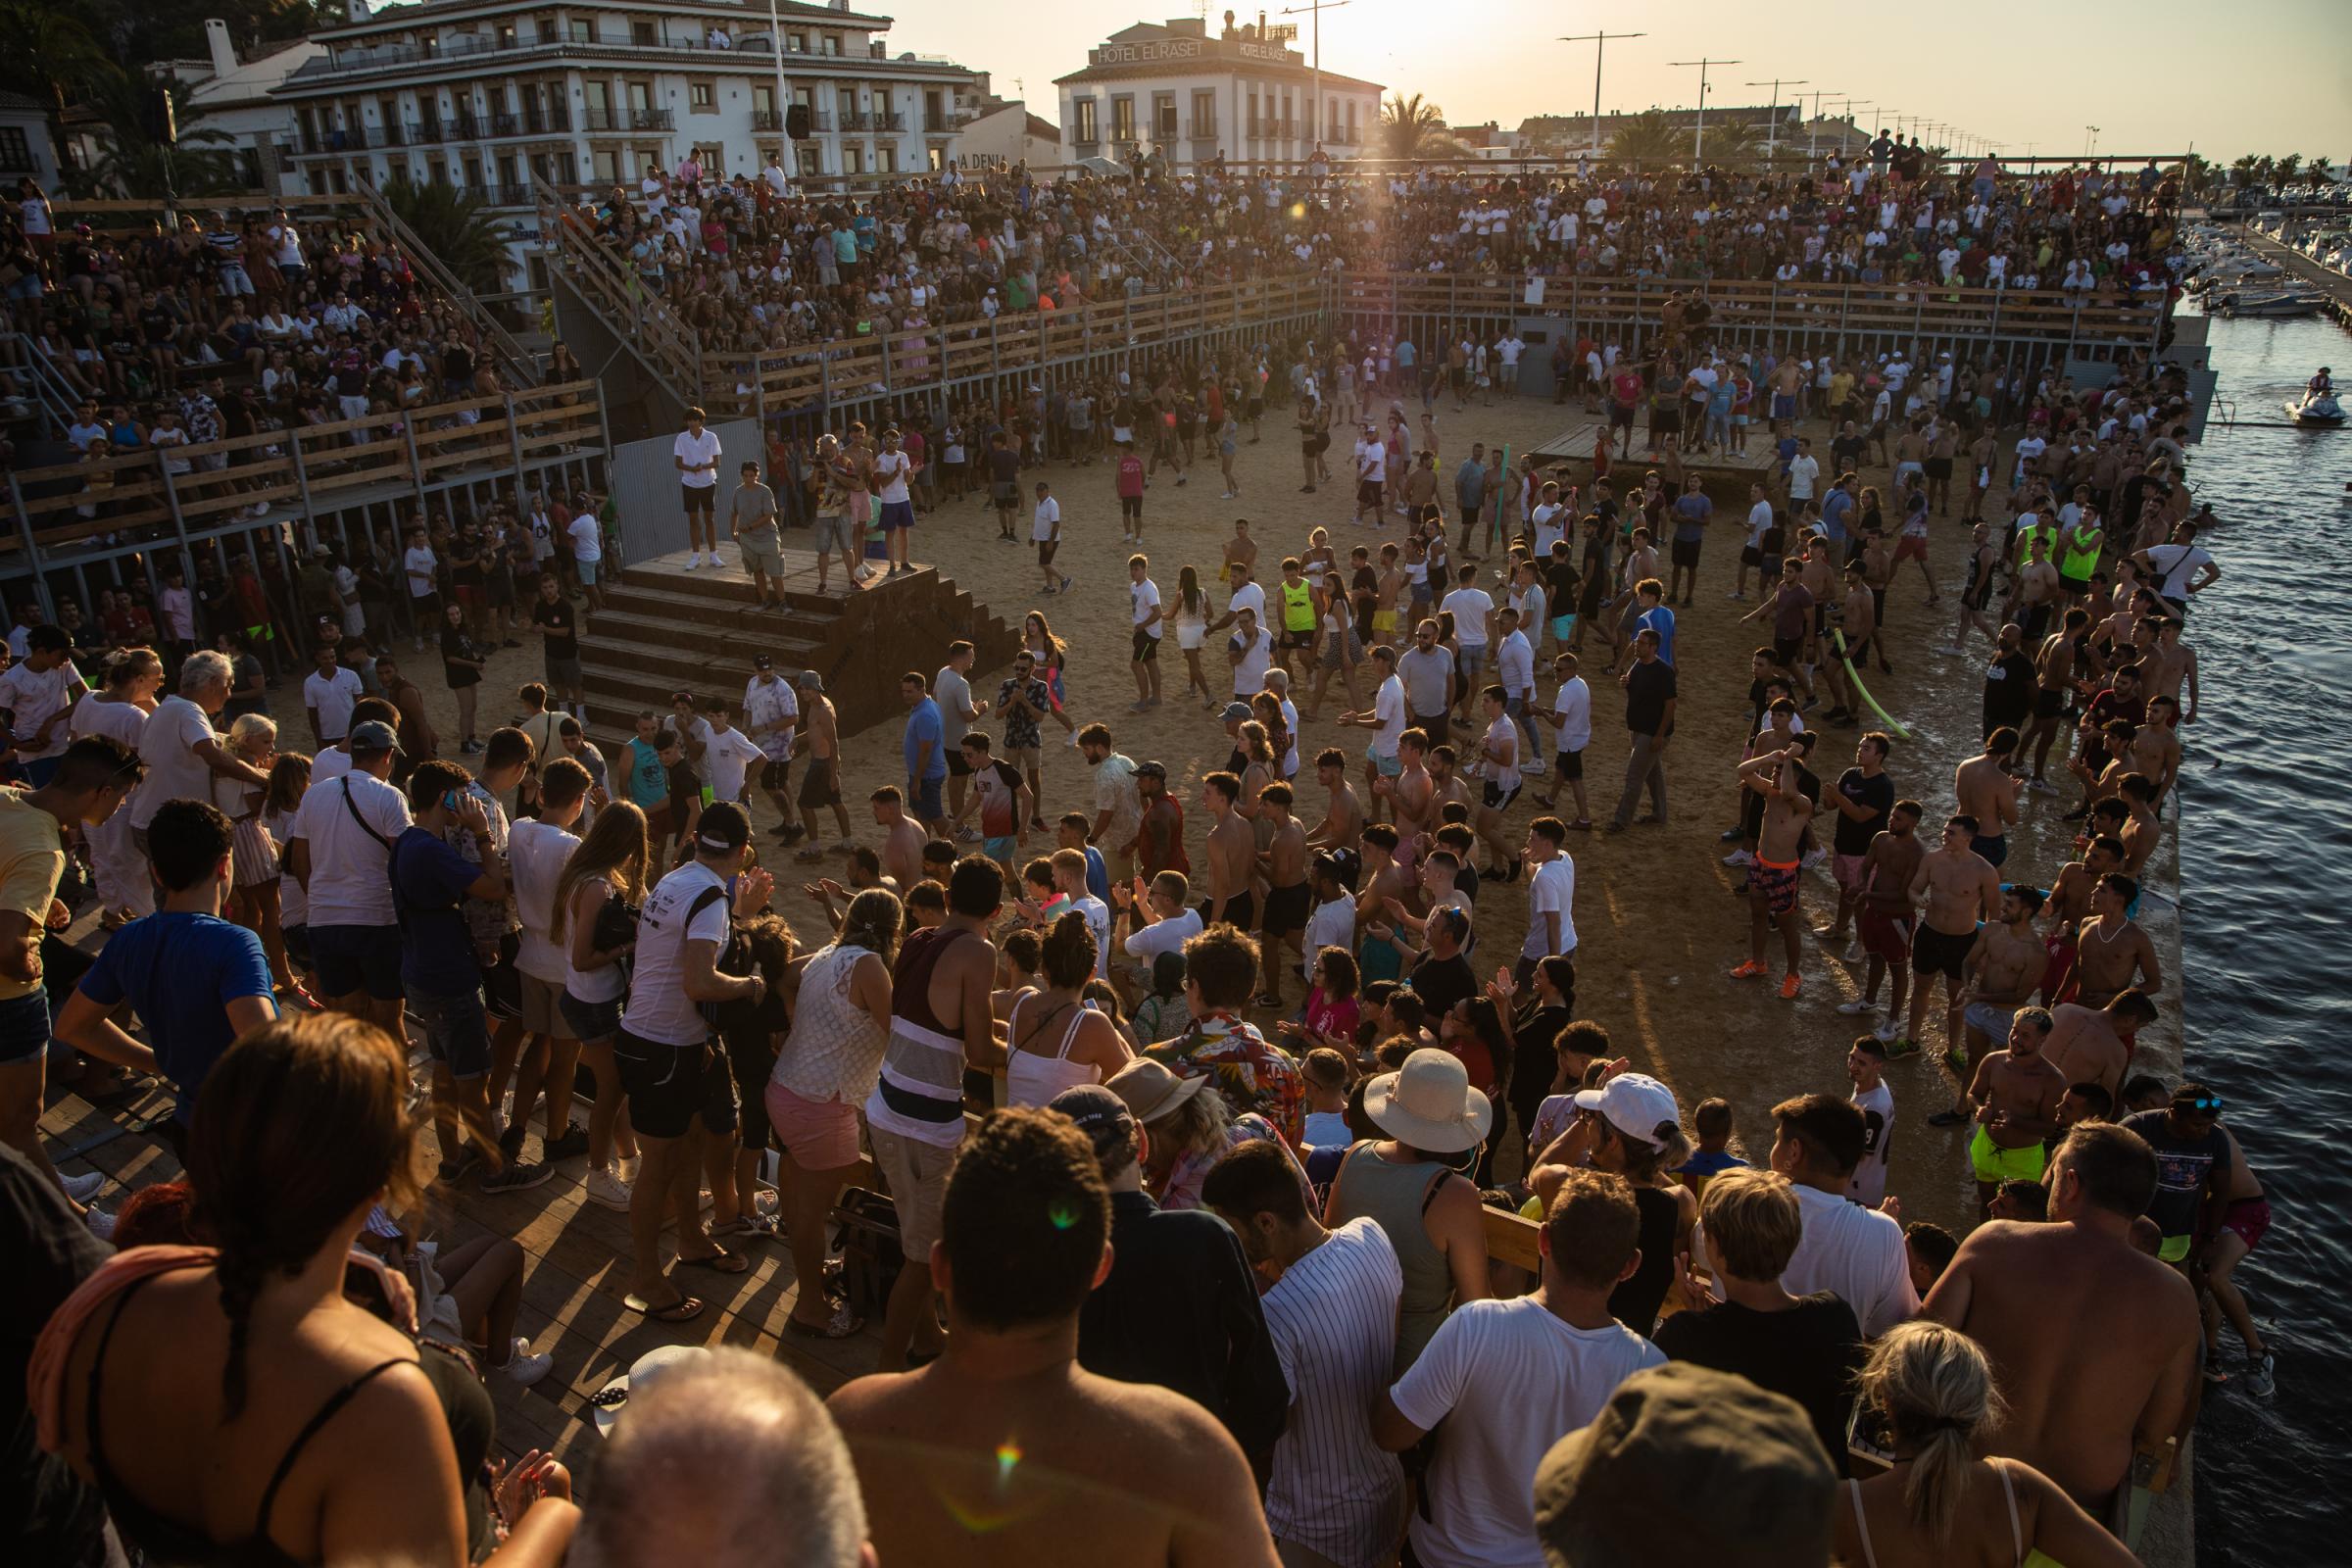 At 'Bous A La Mar', Revelers Take Plunge To Dodge Bulls And Beat The Heat - DENIA, SPAIN - JULY 17: The bull makes the participants...